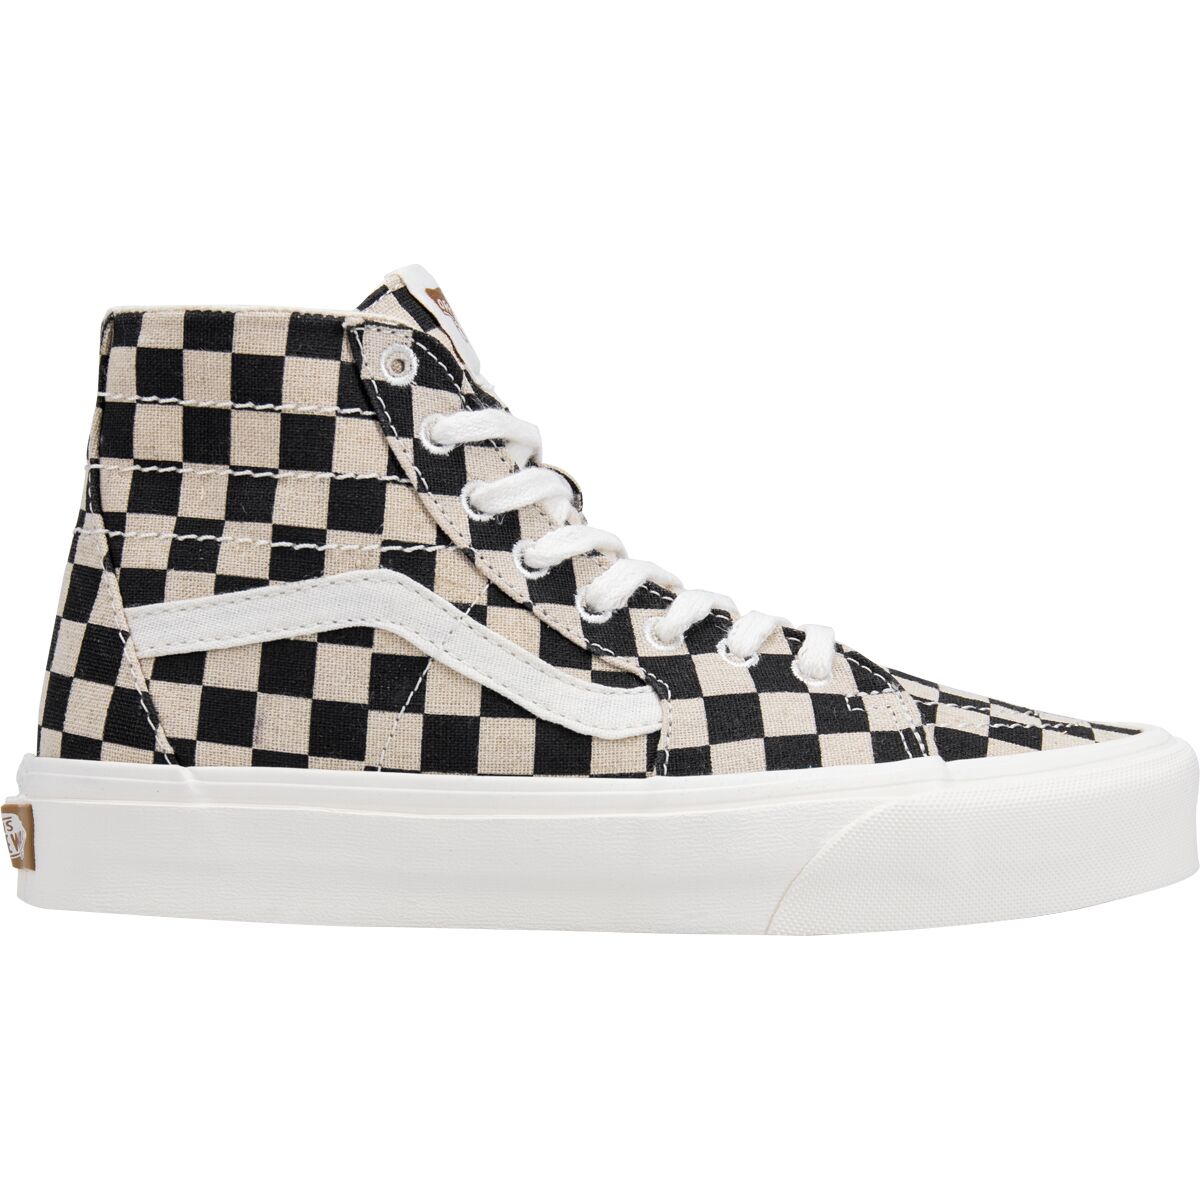 Vans Eco Theory Sk8-Hi Tapered Checkerboard Shoe